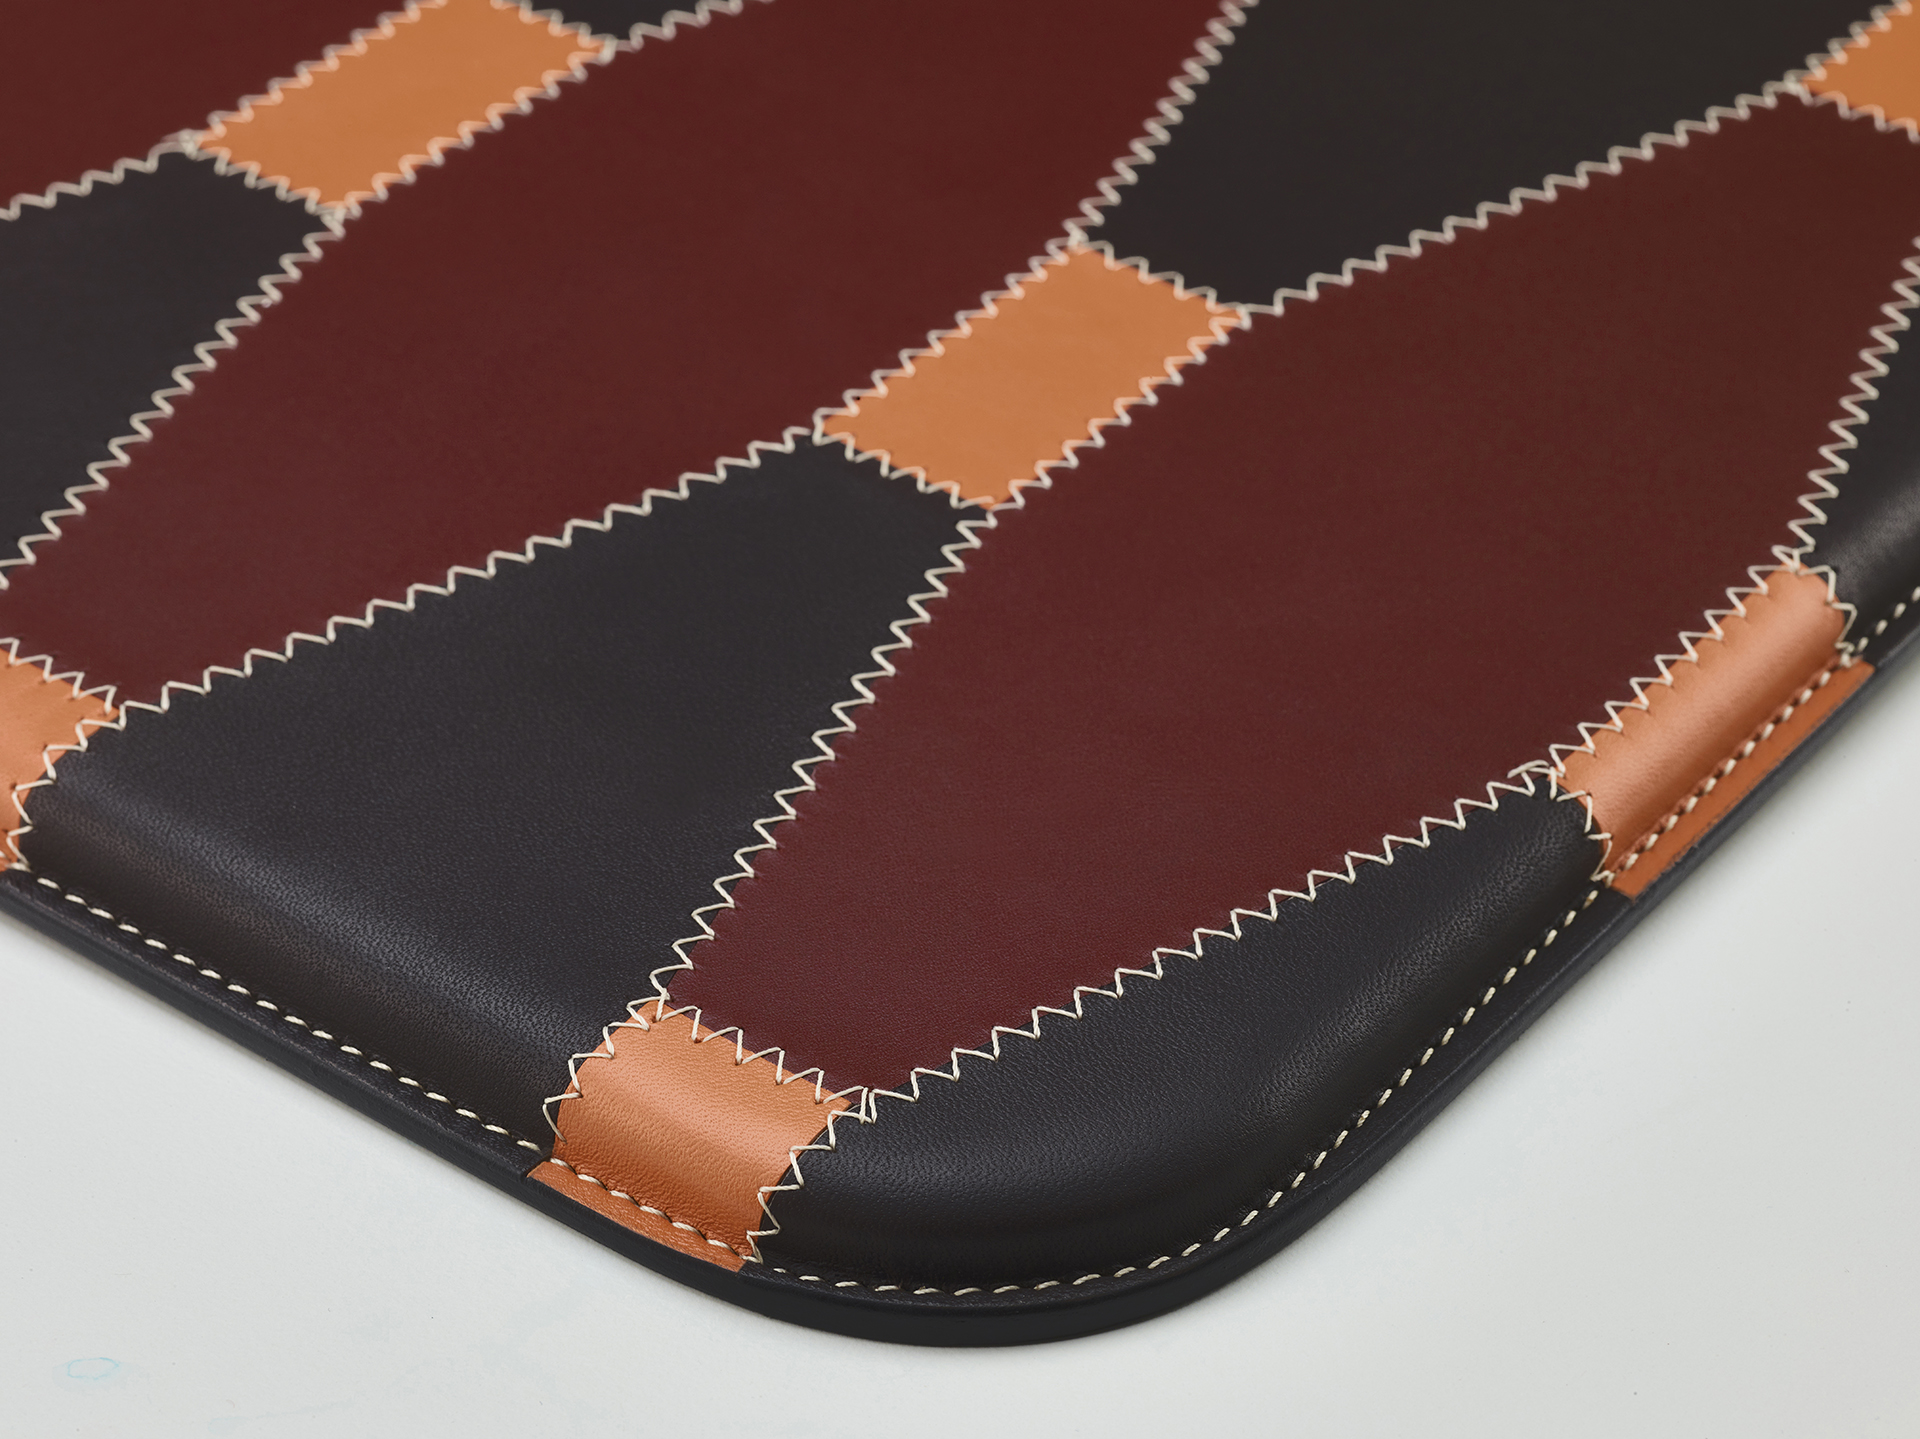 Detail of Tovaglietta Americana Patchwork, a patchwork American placemat that combines different colors of leather, from Promemoria's catalogue | Promemoria